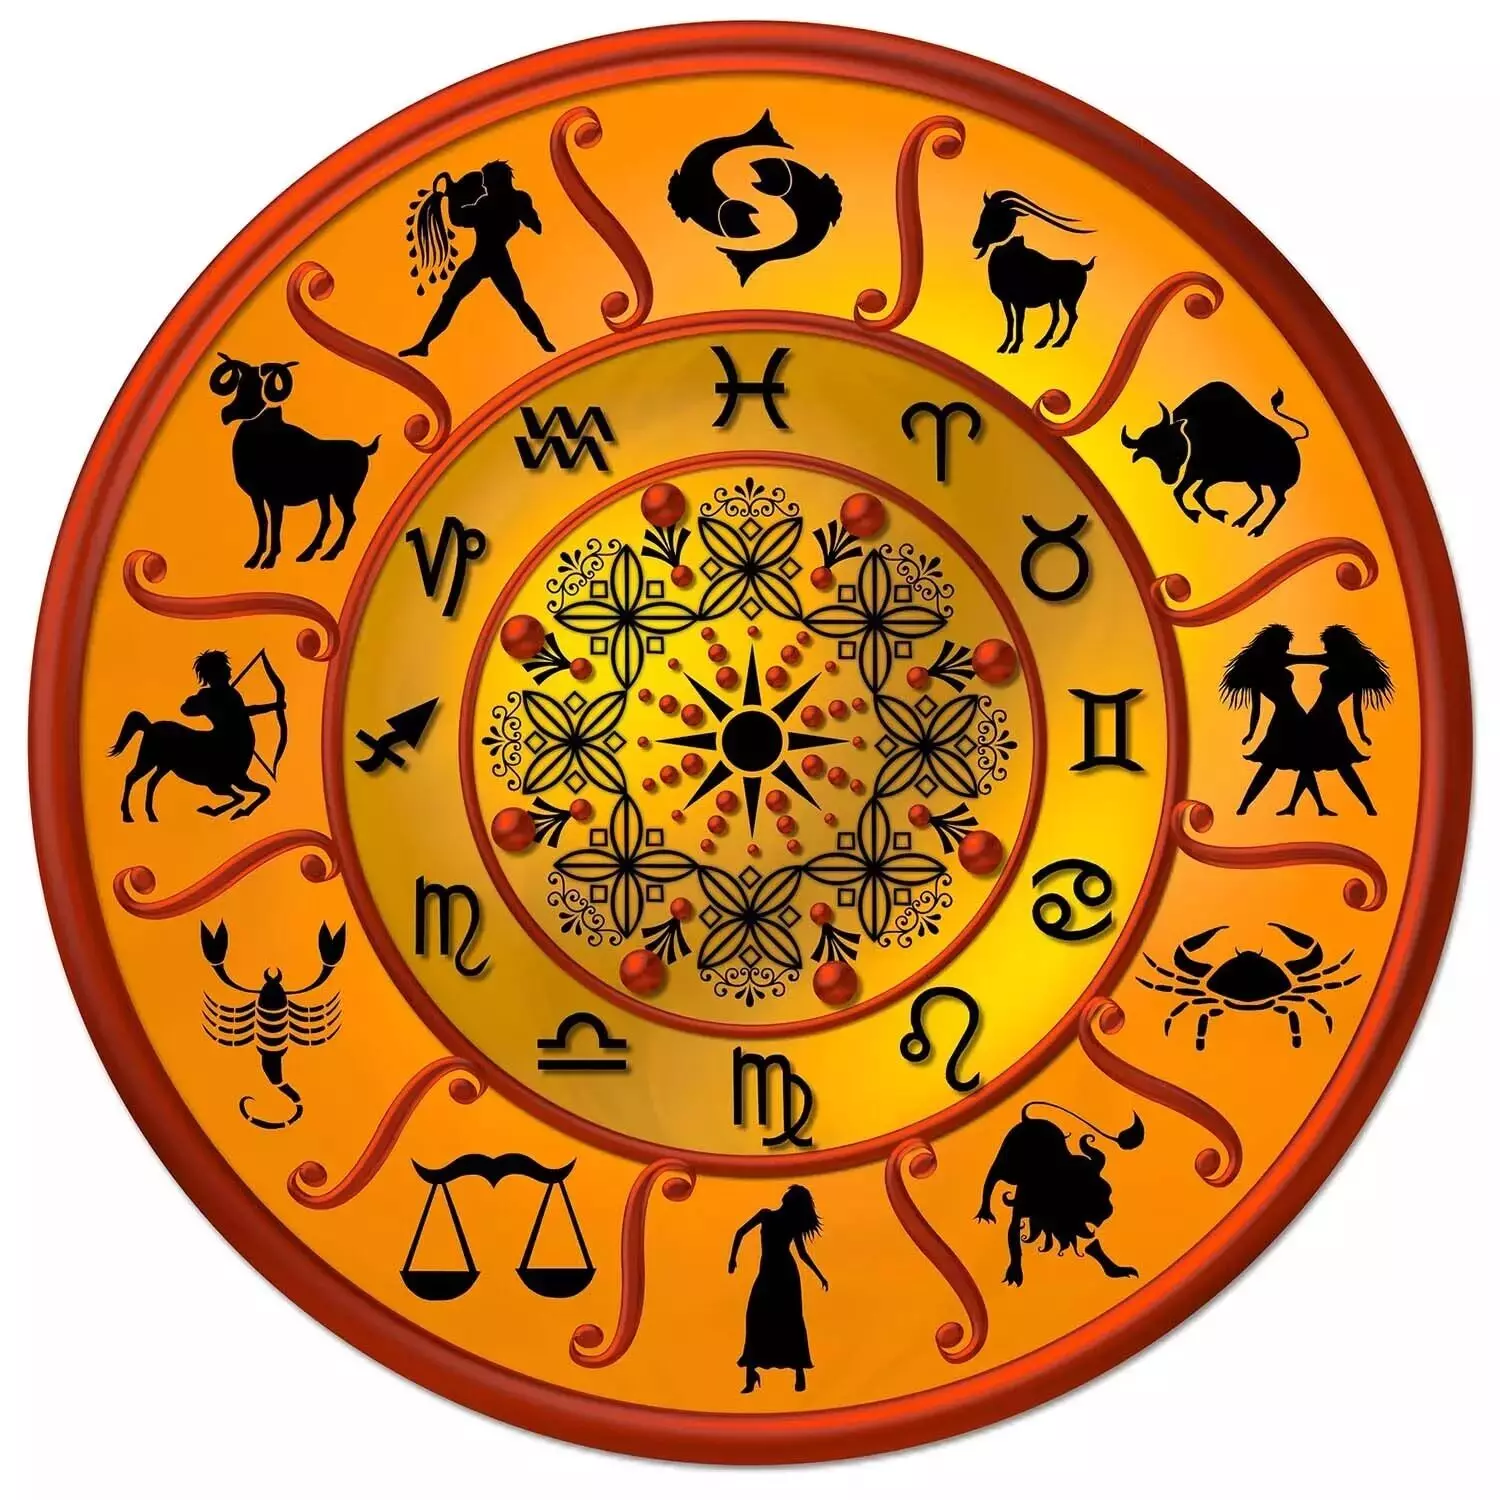 03 January   – Know your todays horoscope